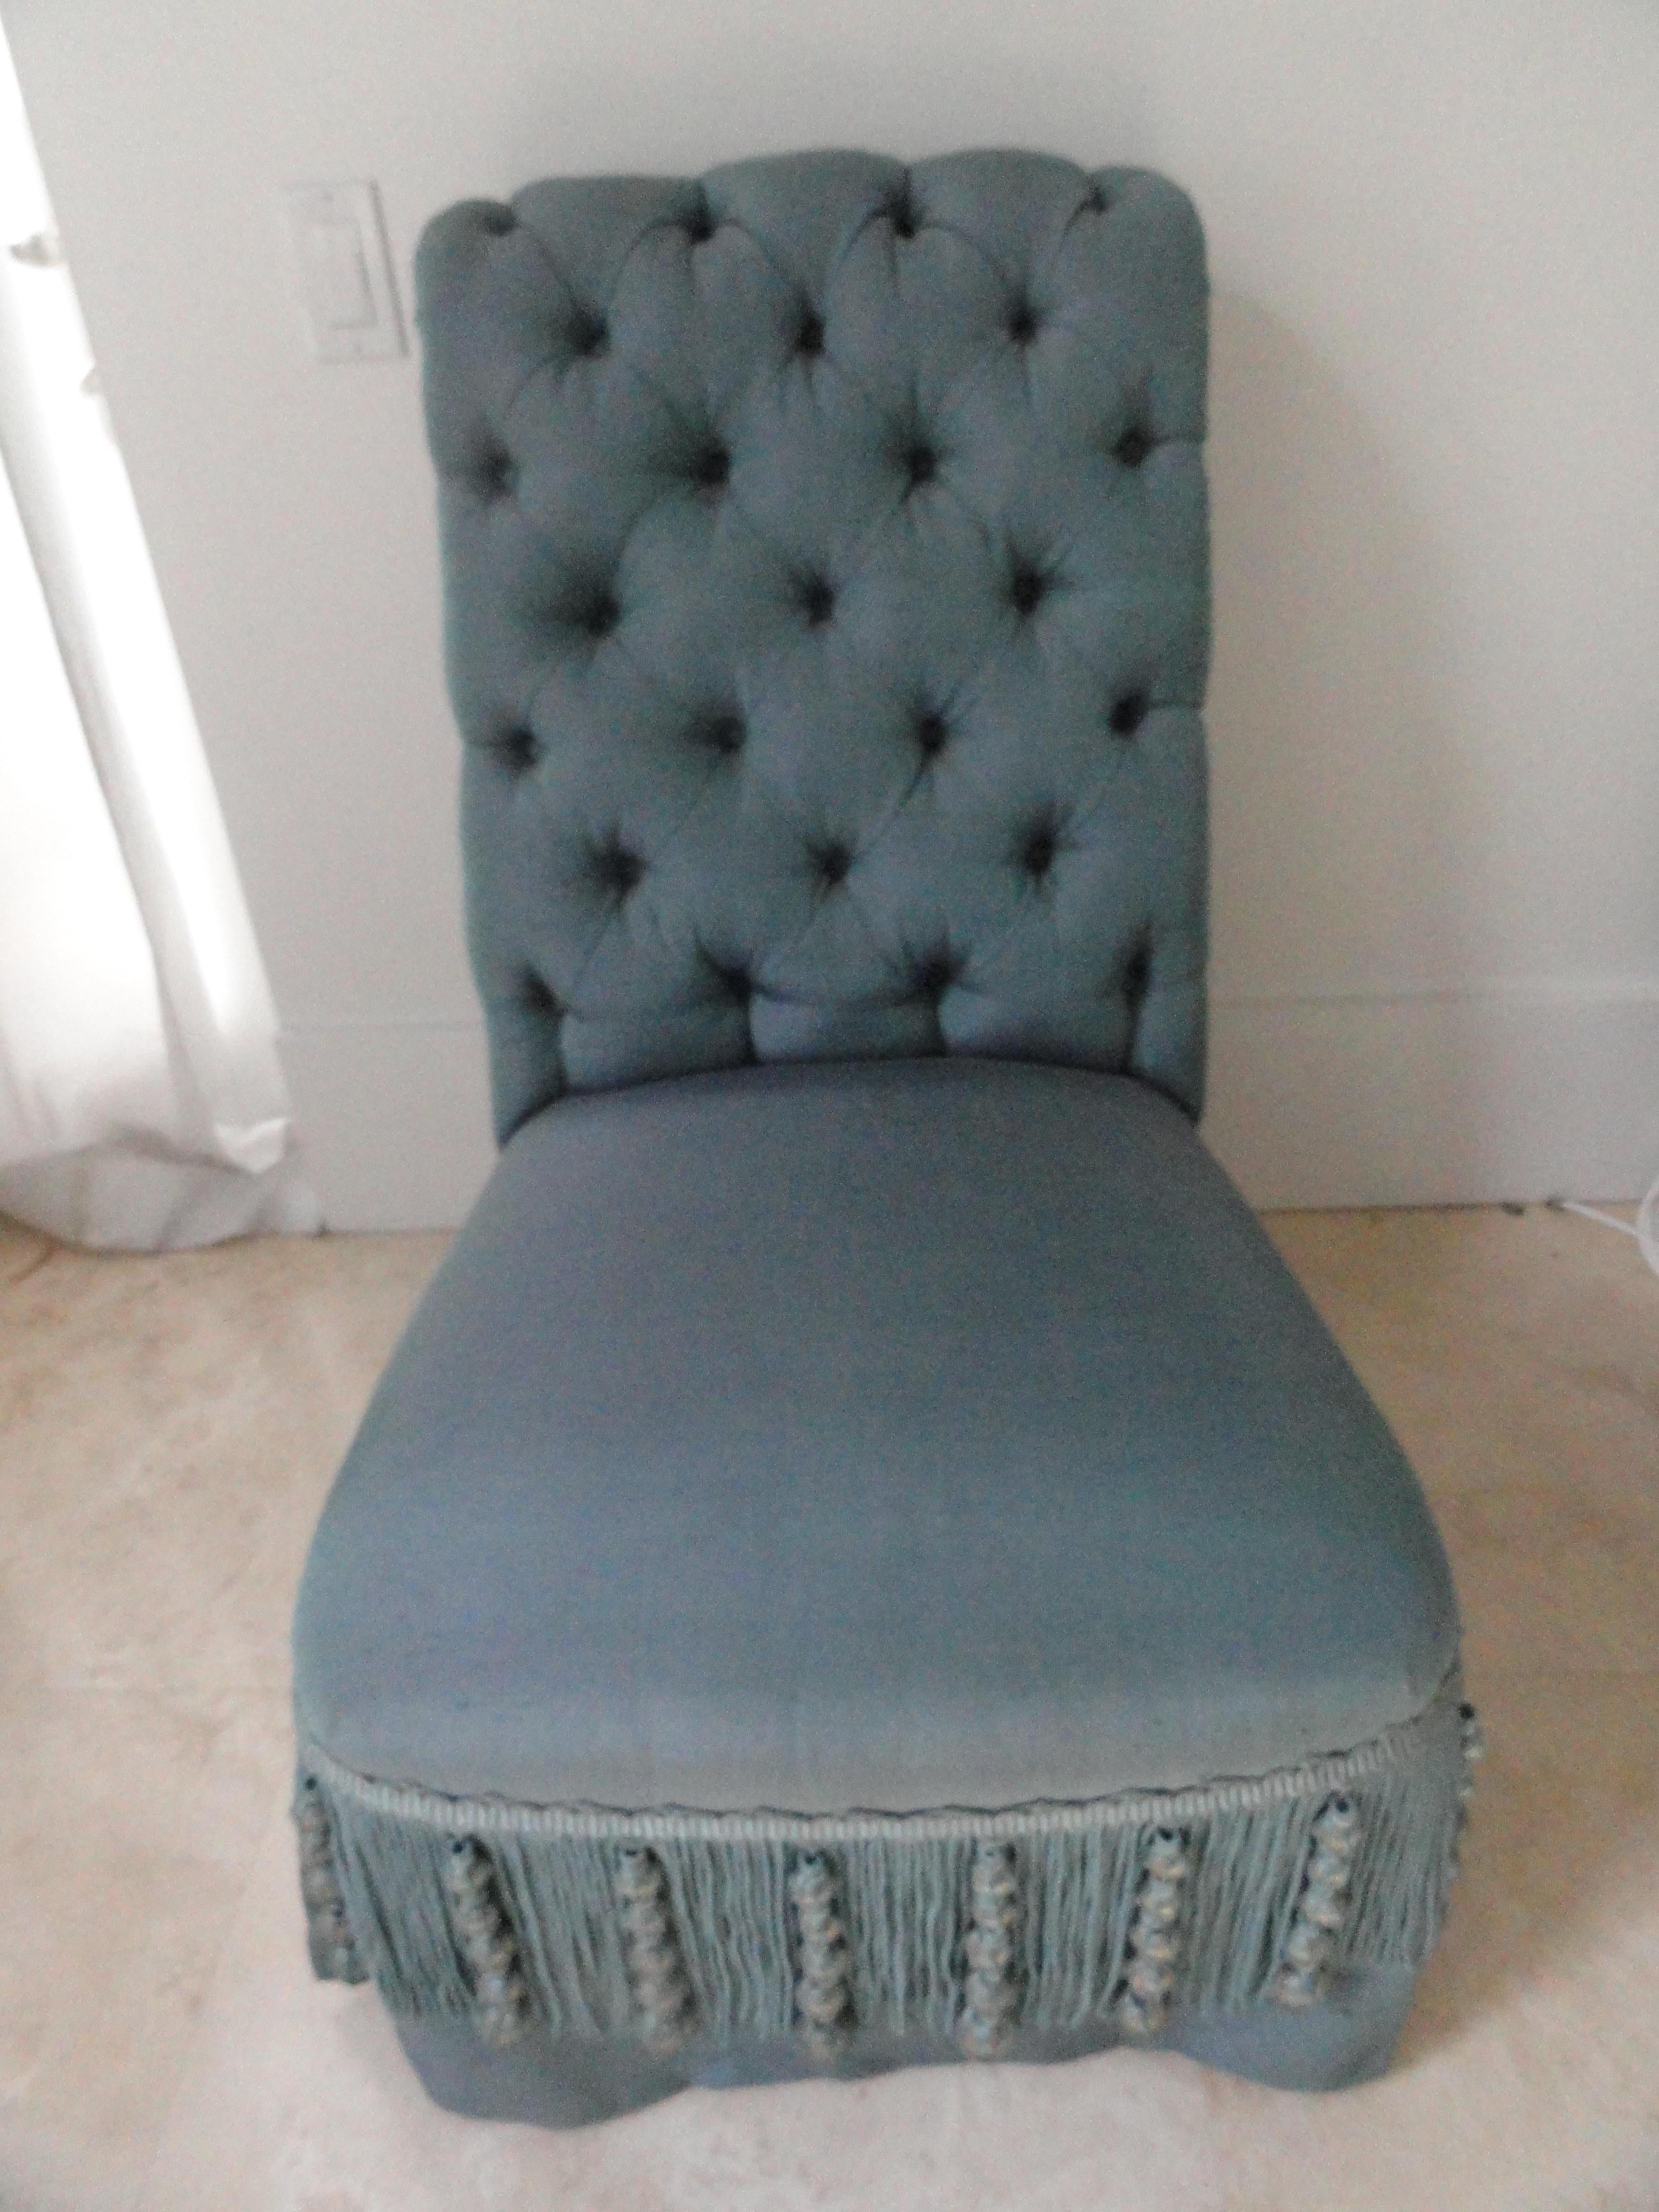 19th century French Napoleon III slipper chair with a tufted back, beautifully upholstered in Henry Calvin Athena Taffeta with a superb decorative fringe. Chair has sabot.